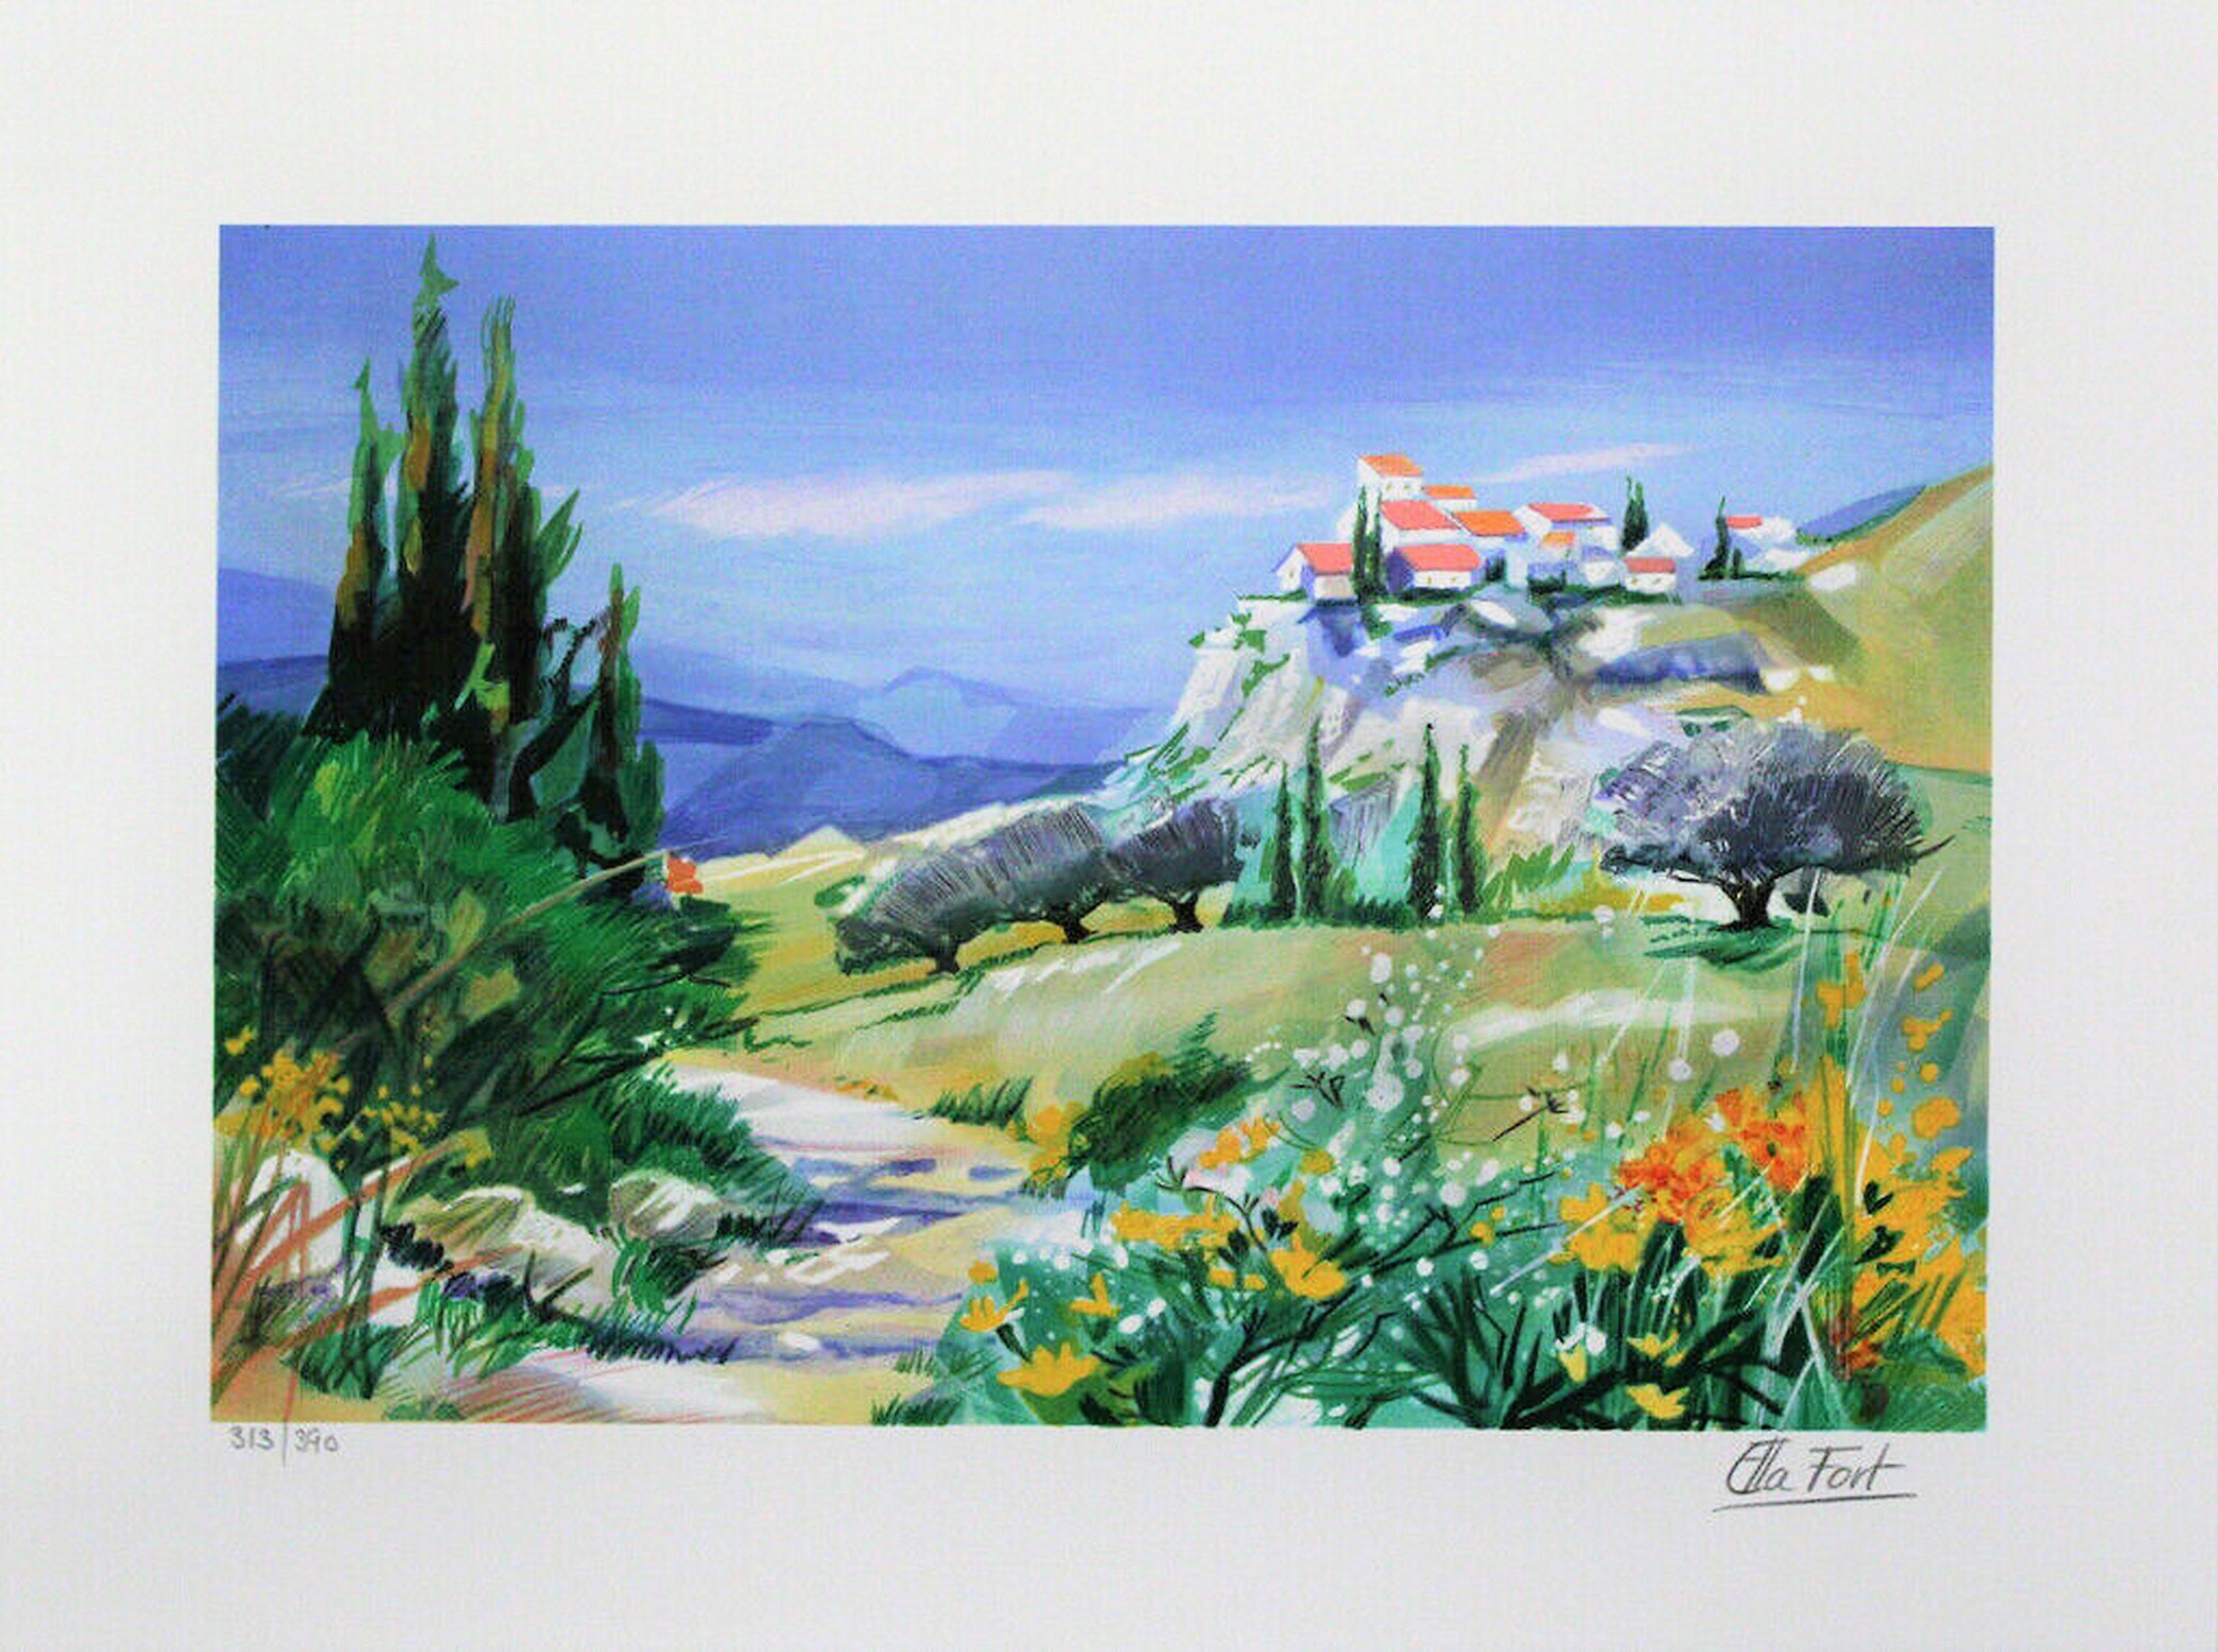 Ella Fort
Spring in Brittany (Champ Fleuri)
Color Lithograph
Signed, numbered or inscribed
Edition: 390 + 250
Size: 7.8 × 11.7 on 11.7 × 15.6 inches 
Framed: 16.25x20 inches
COA provided

*Framing Options Available - Please Inquire
**edition number